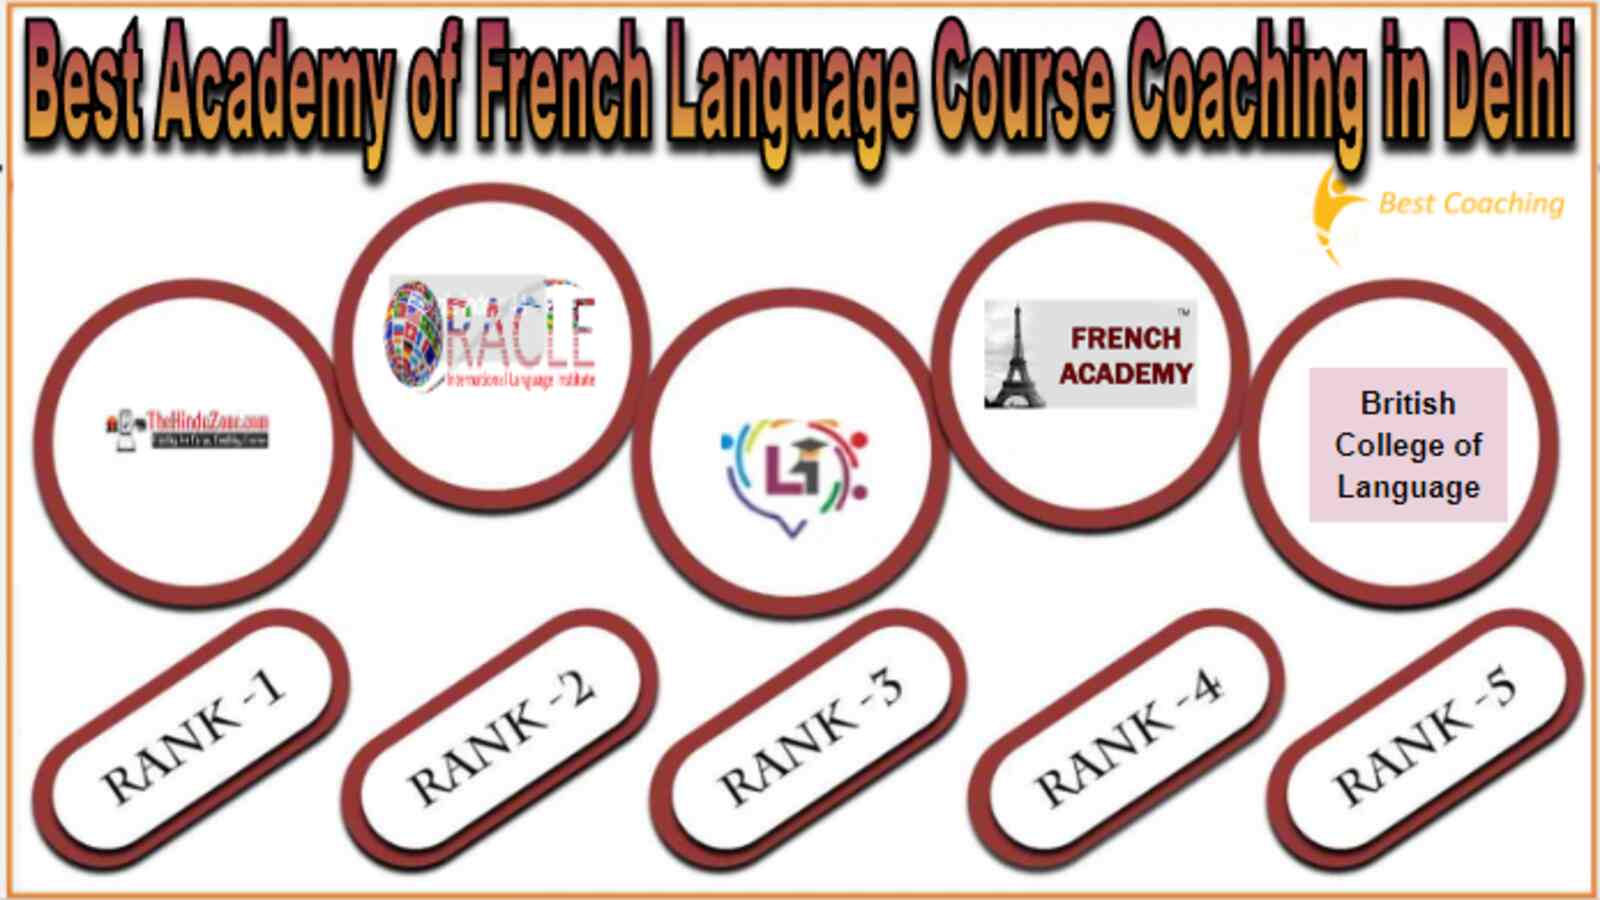 Best Academy of French Language Course Coaching in Delhi